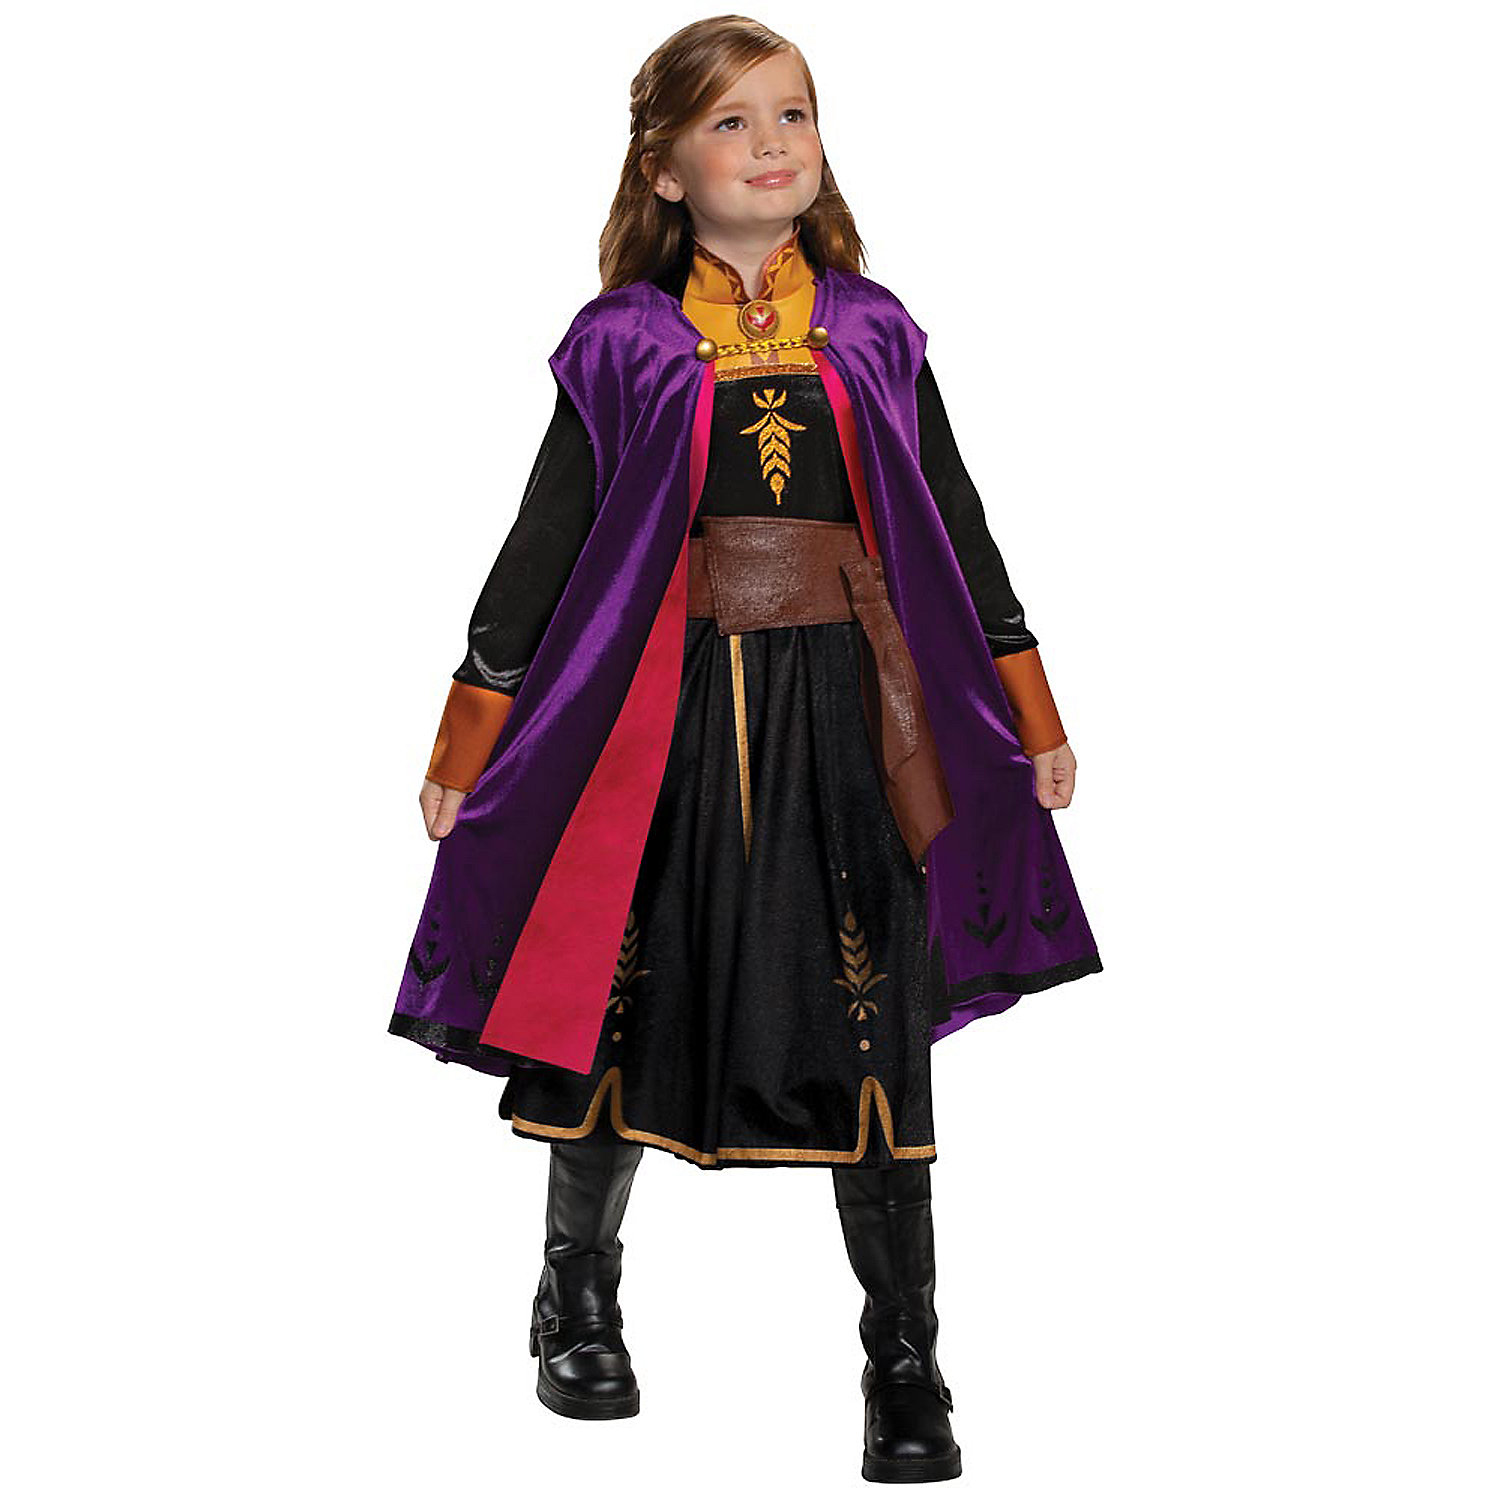 Disguise Toddler Girls' Disney's Frozen Anna Deluxe Costume - Size 3T-4T - image 1 of 3